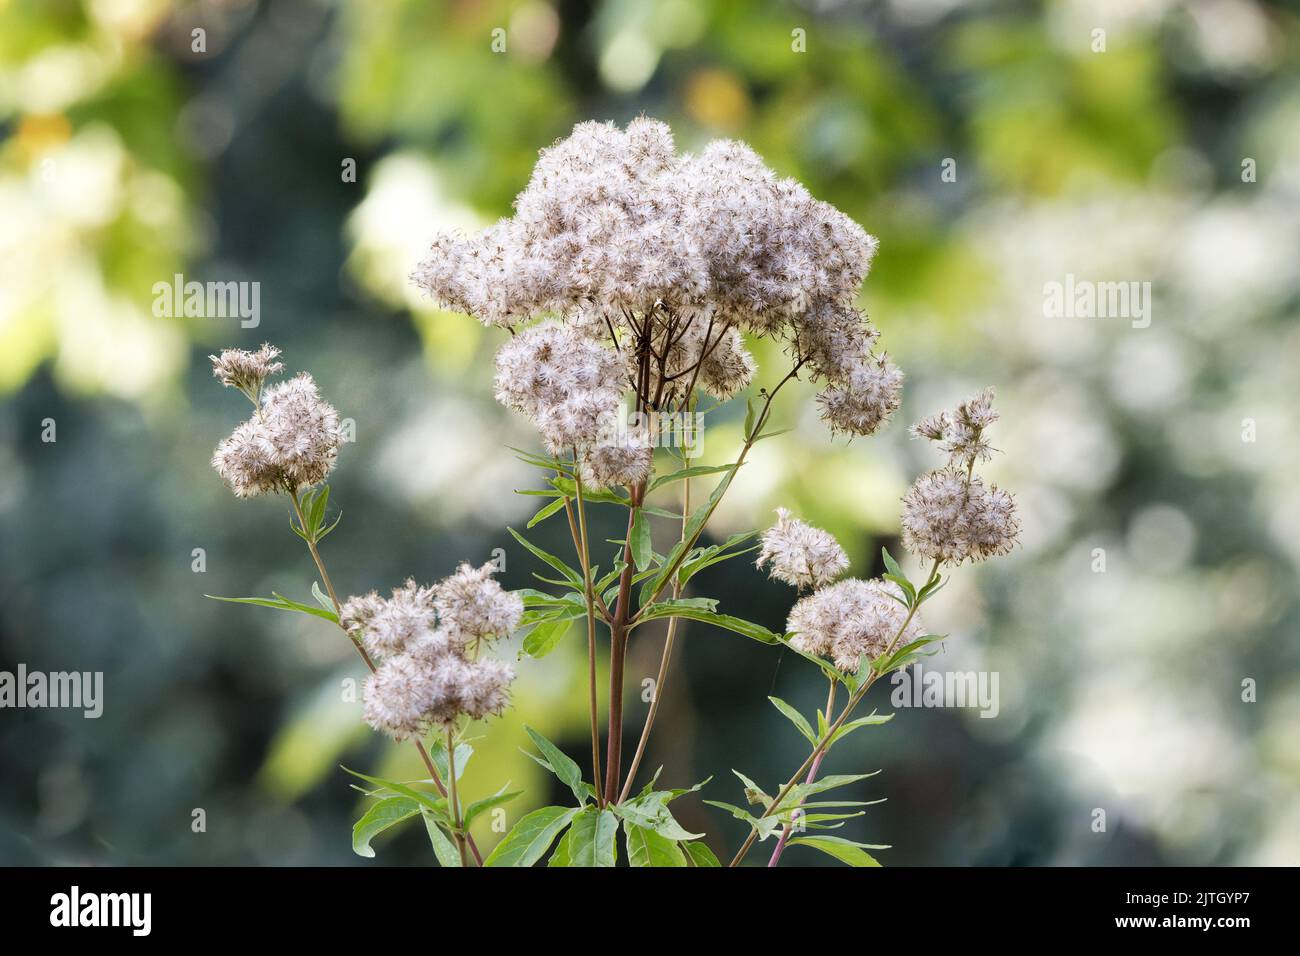 Eupatorium cannabinum hemp agrimony or holy rope against blurred background in a park in cologne Stock Photo